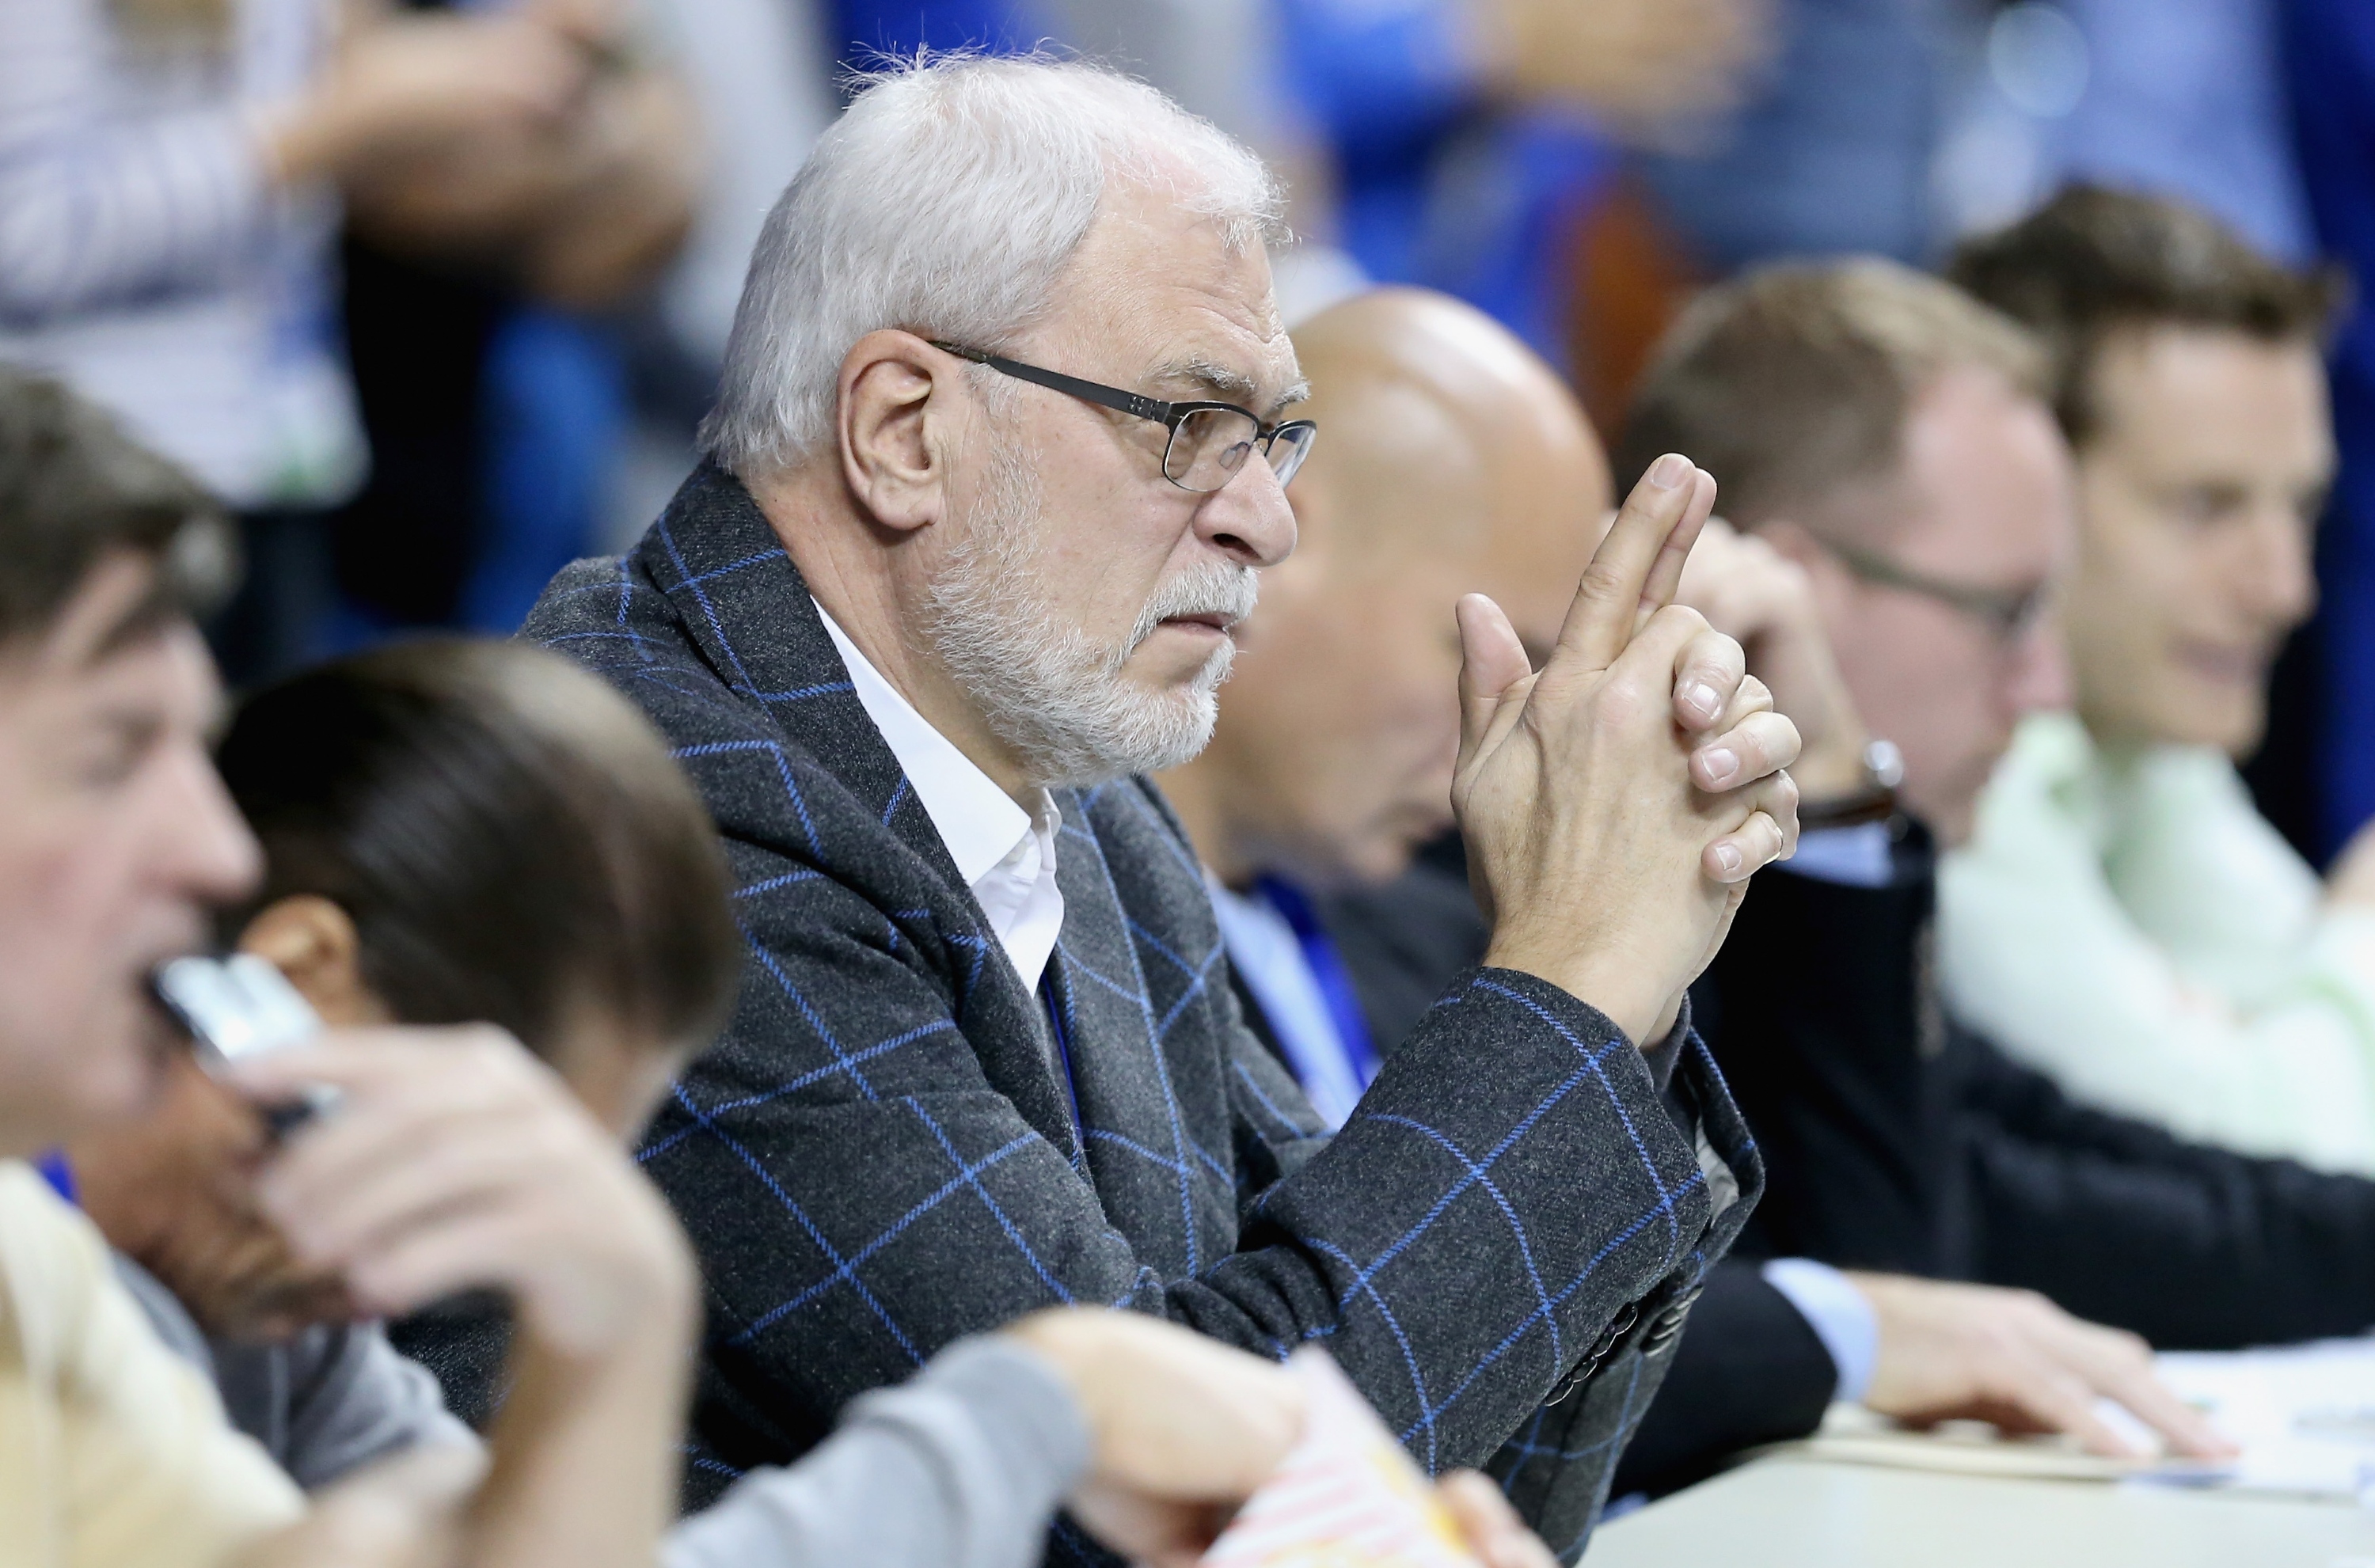 Phil Jackson watches Kentucky vs. Arkansas and contemplates the future. (Andy Lyons/Getty Images)